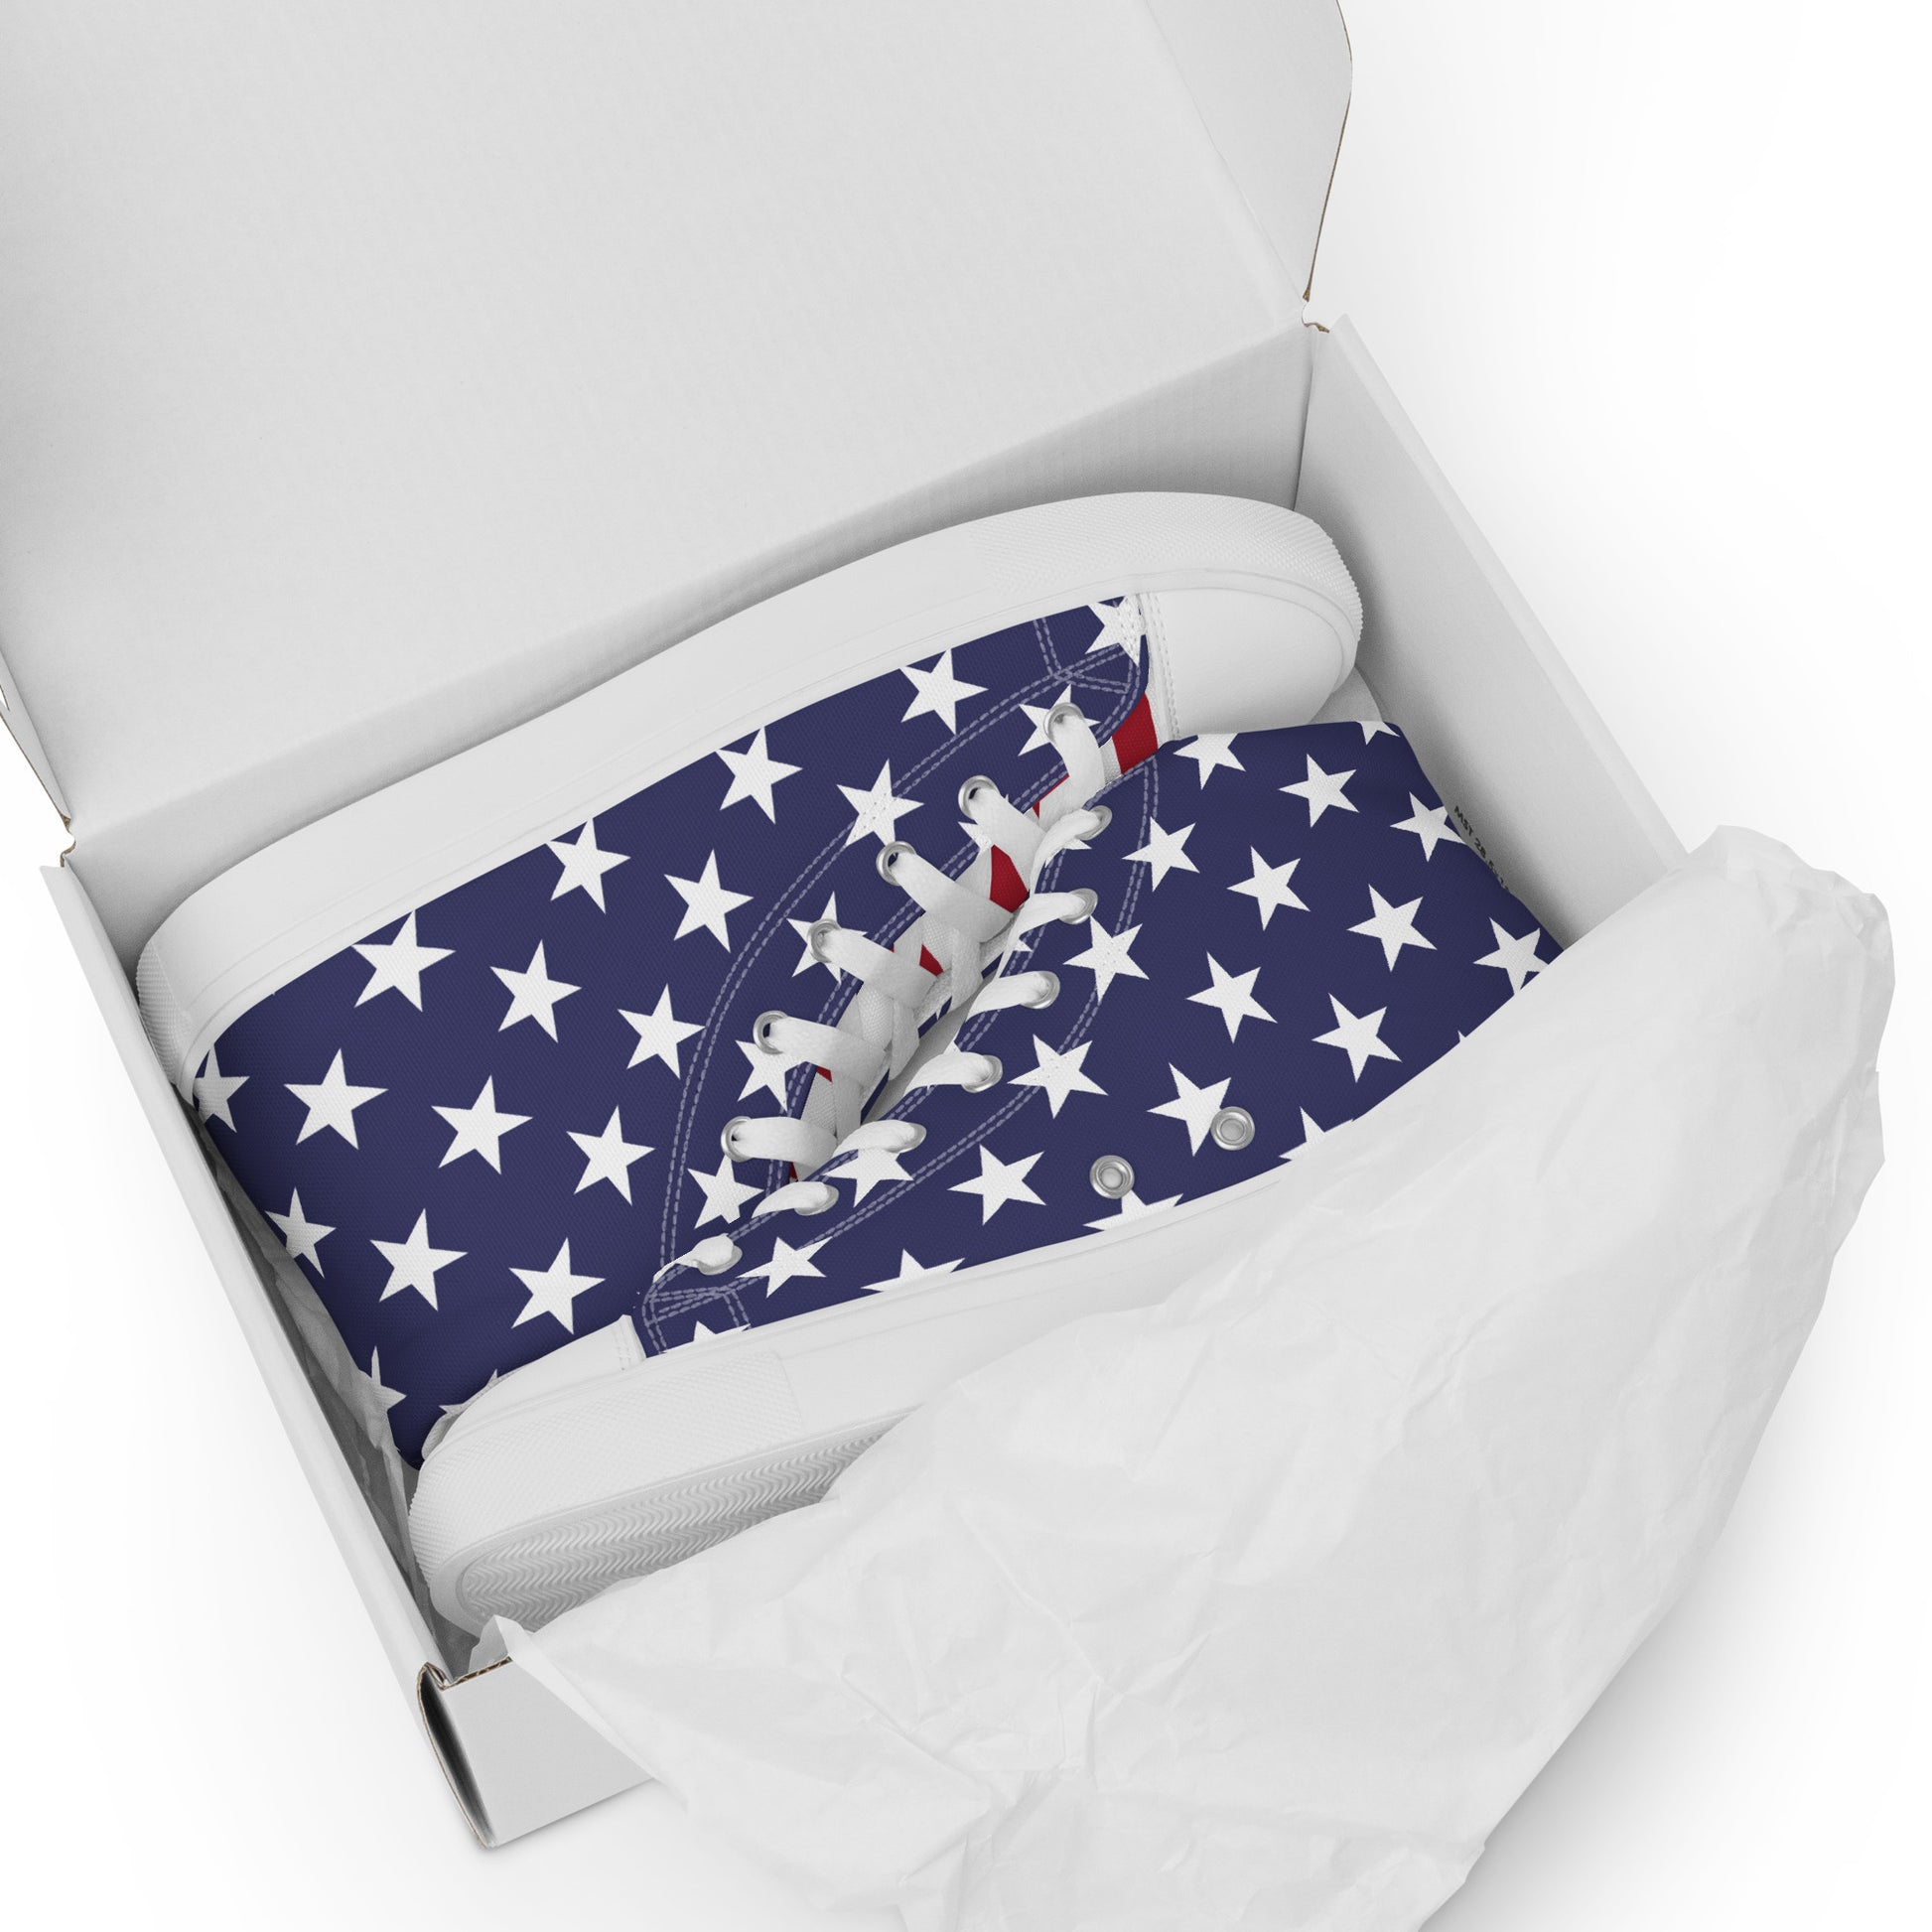 Sneakers in the Box